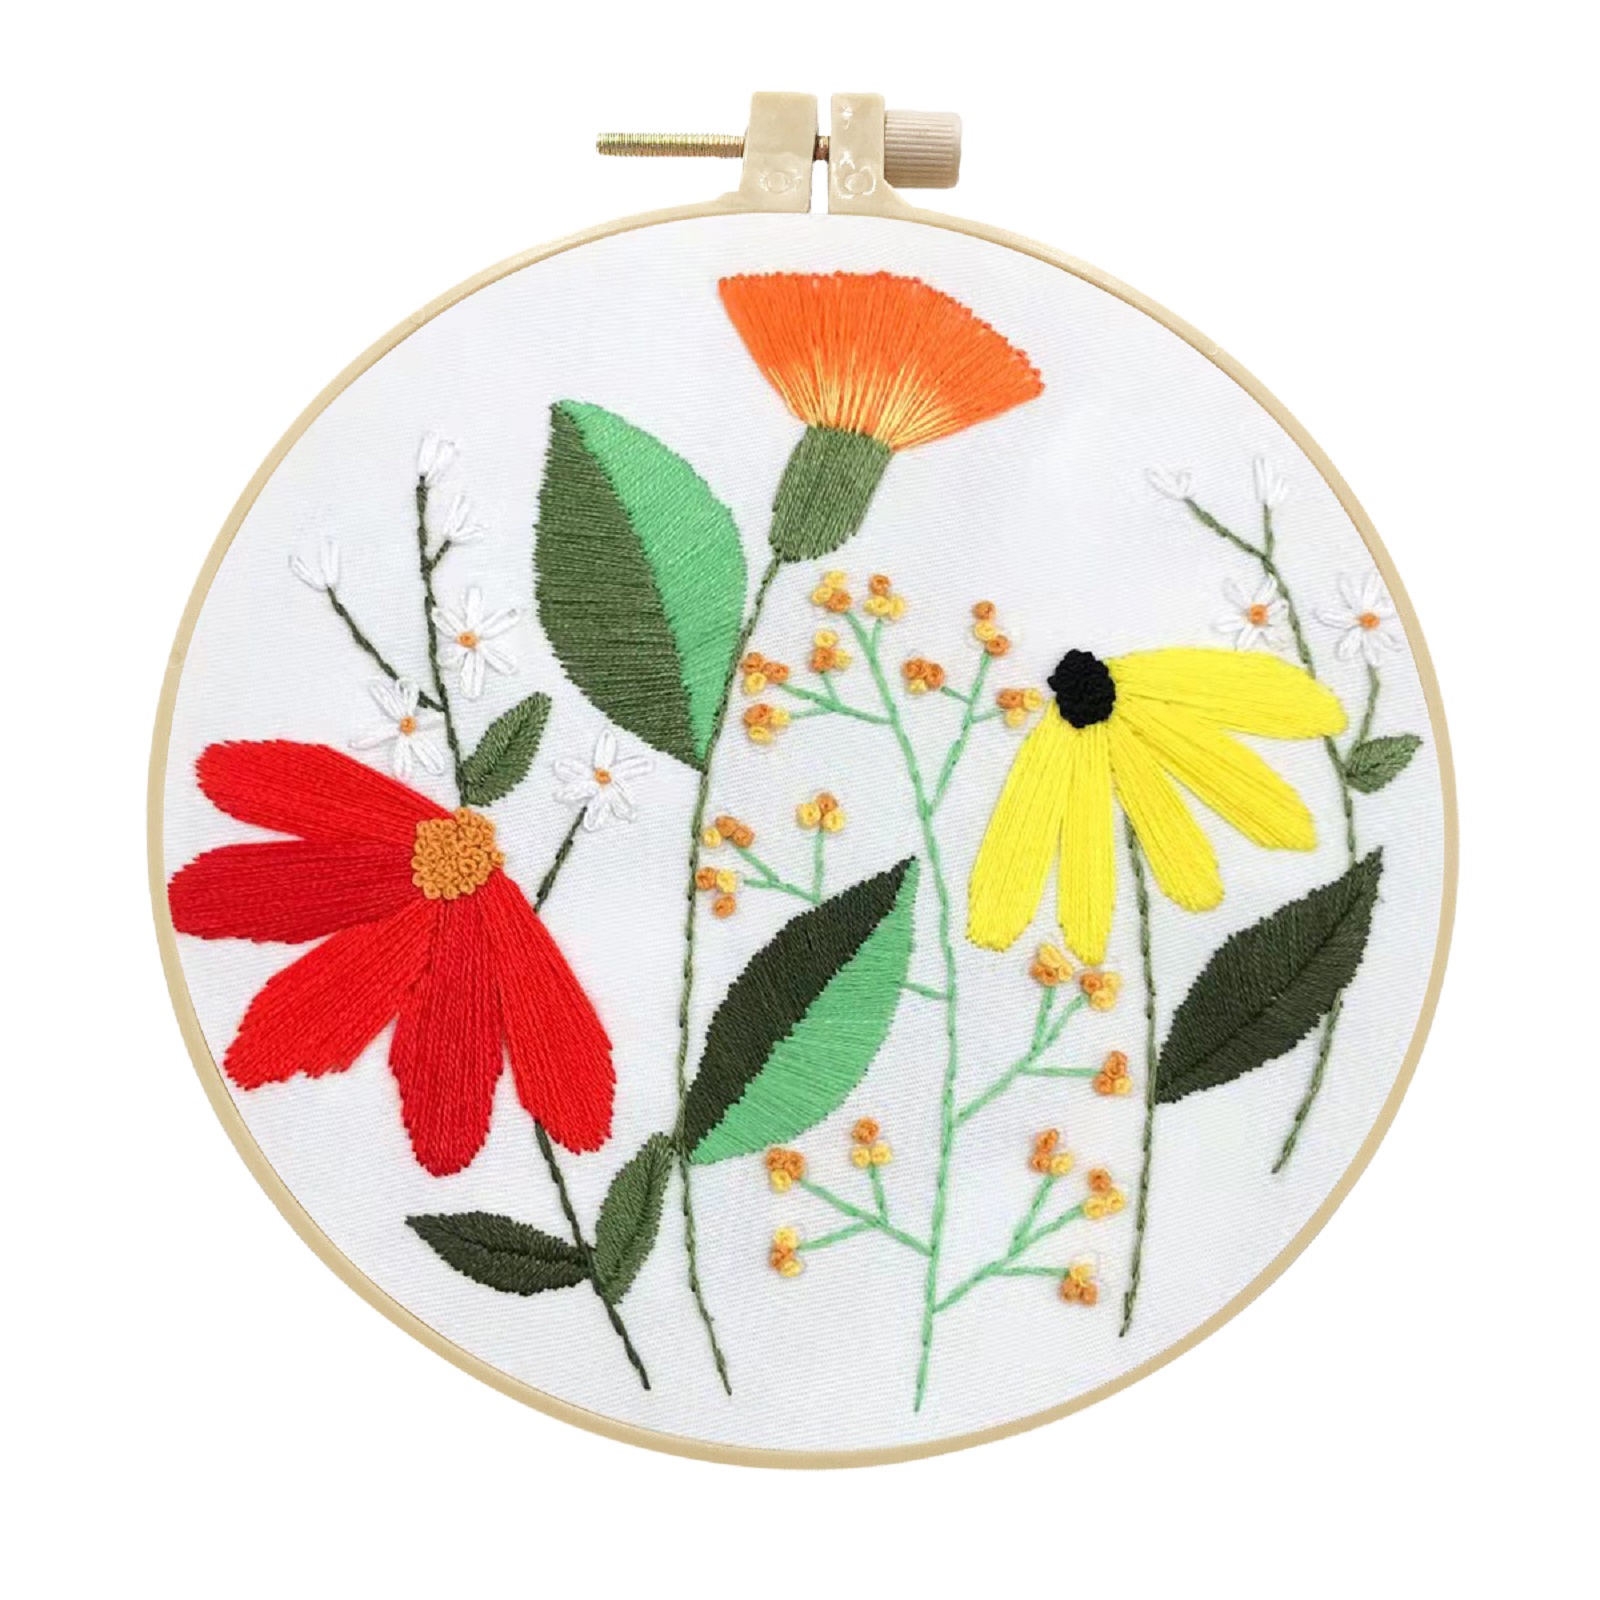 Embroidery Kits Cross stitch kits for Adult Beginner - Large Wildflowers Pattern